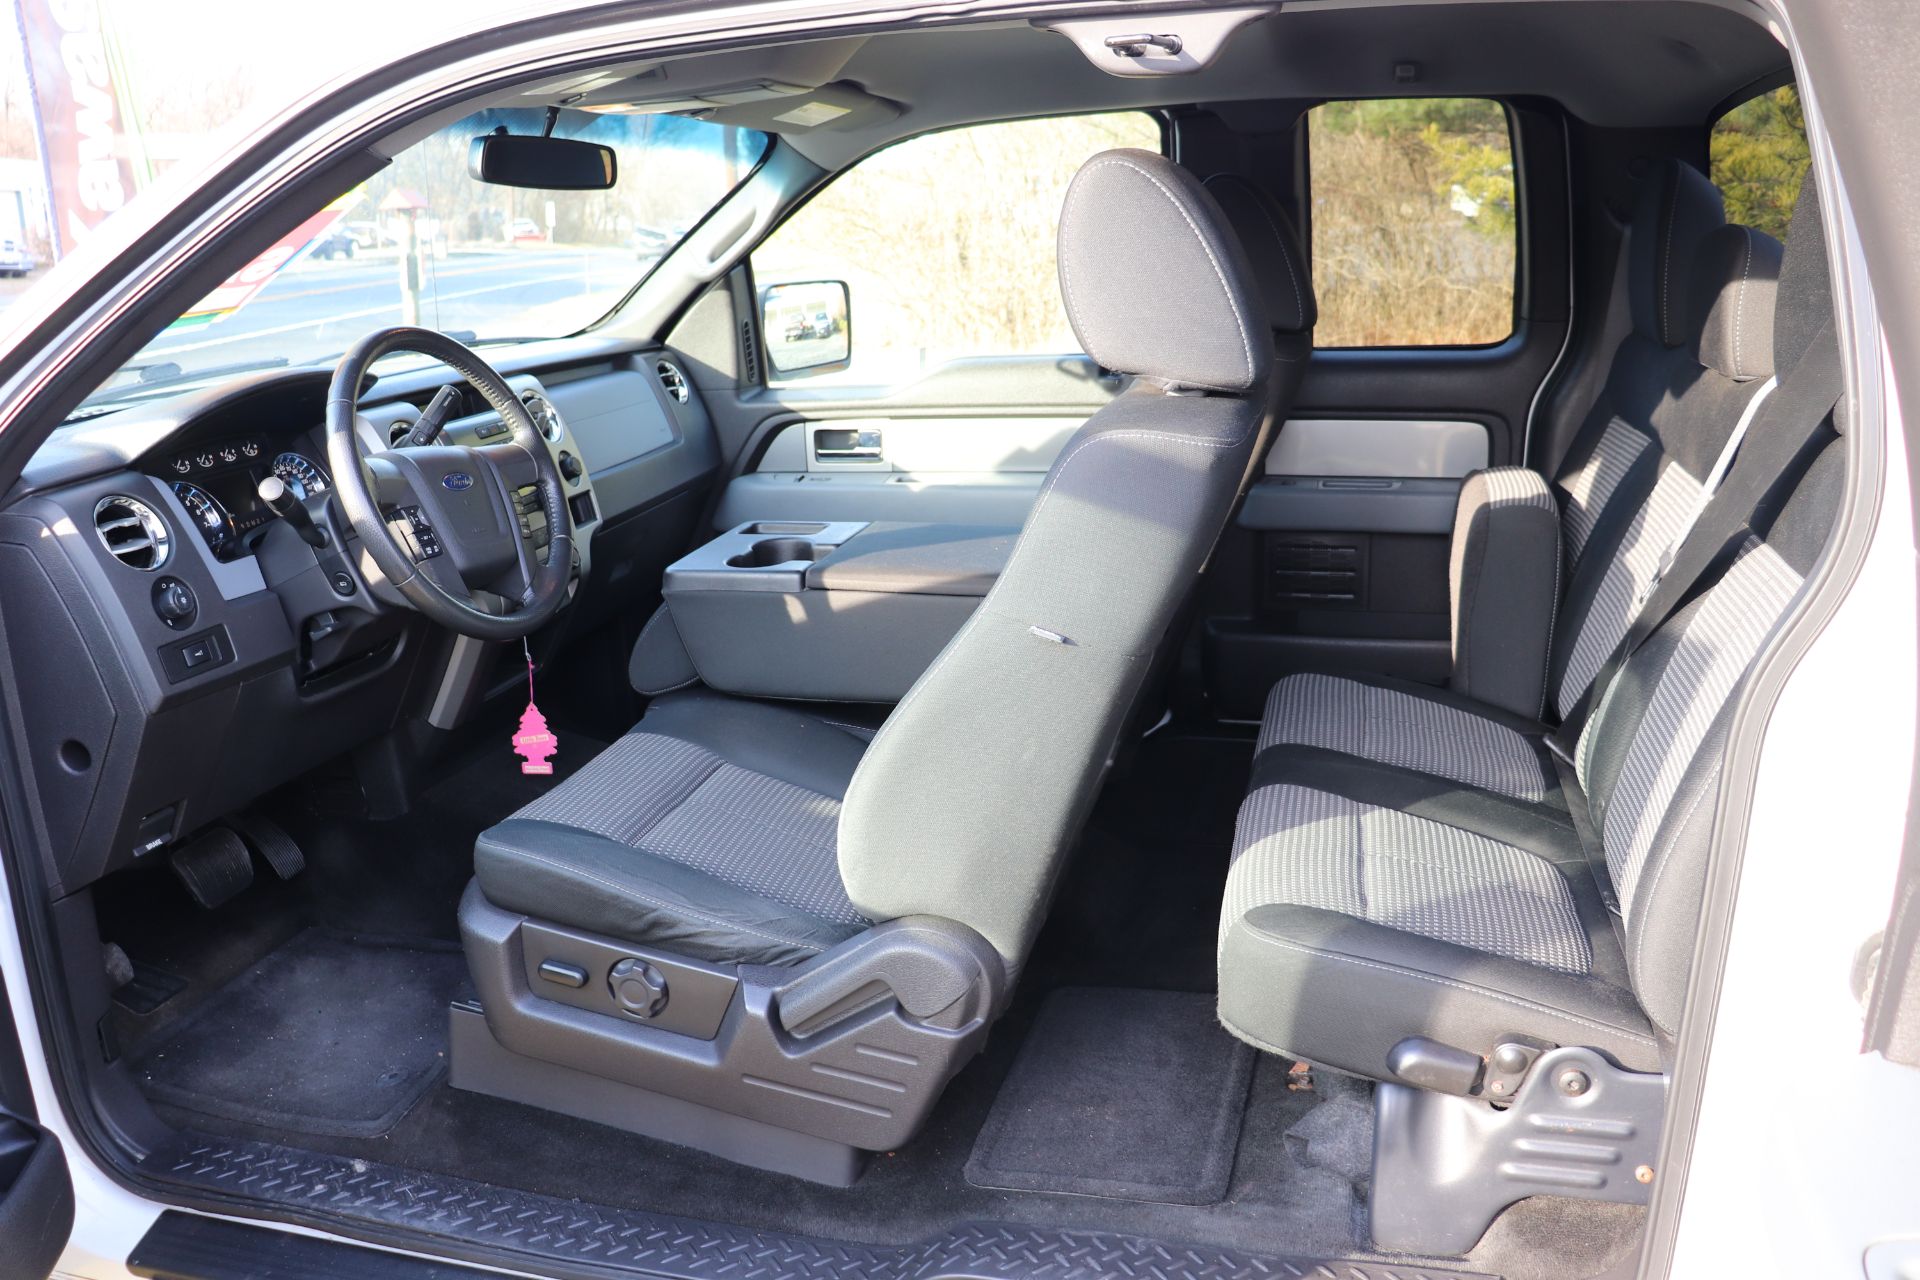 2011 FORD F150 SUPERCAB 4X2 146 W/B in Vincentown, New Jersey - Photo 10